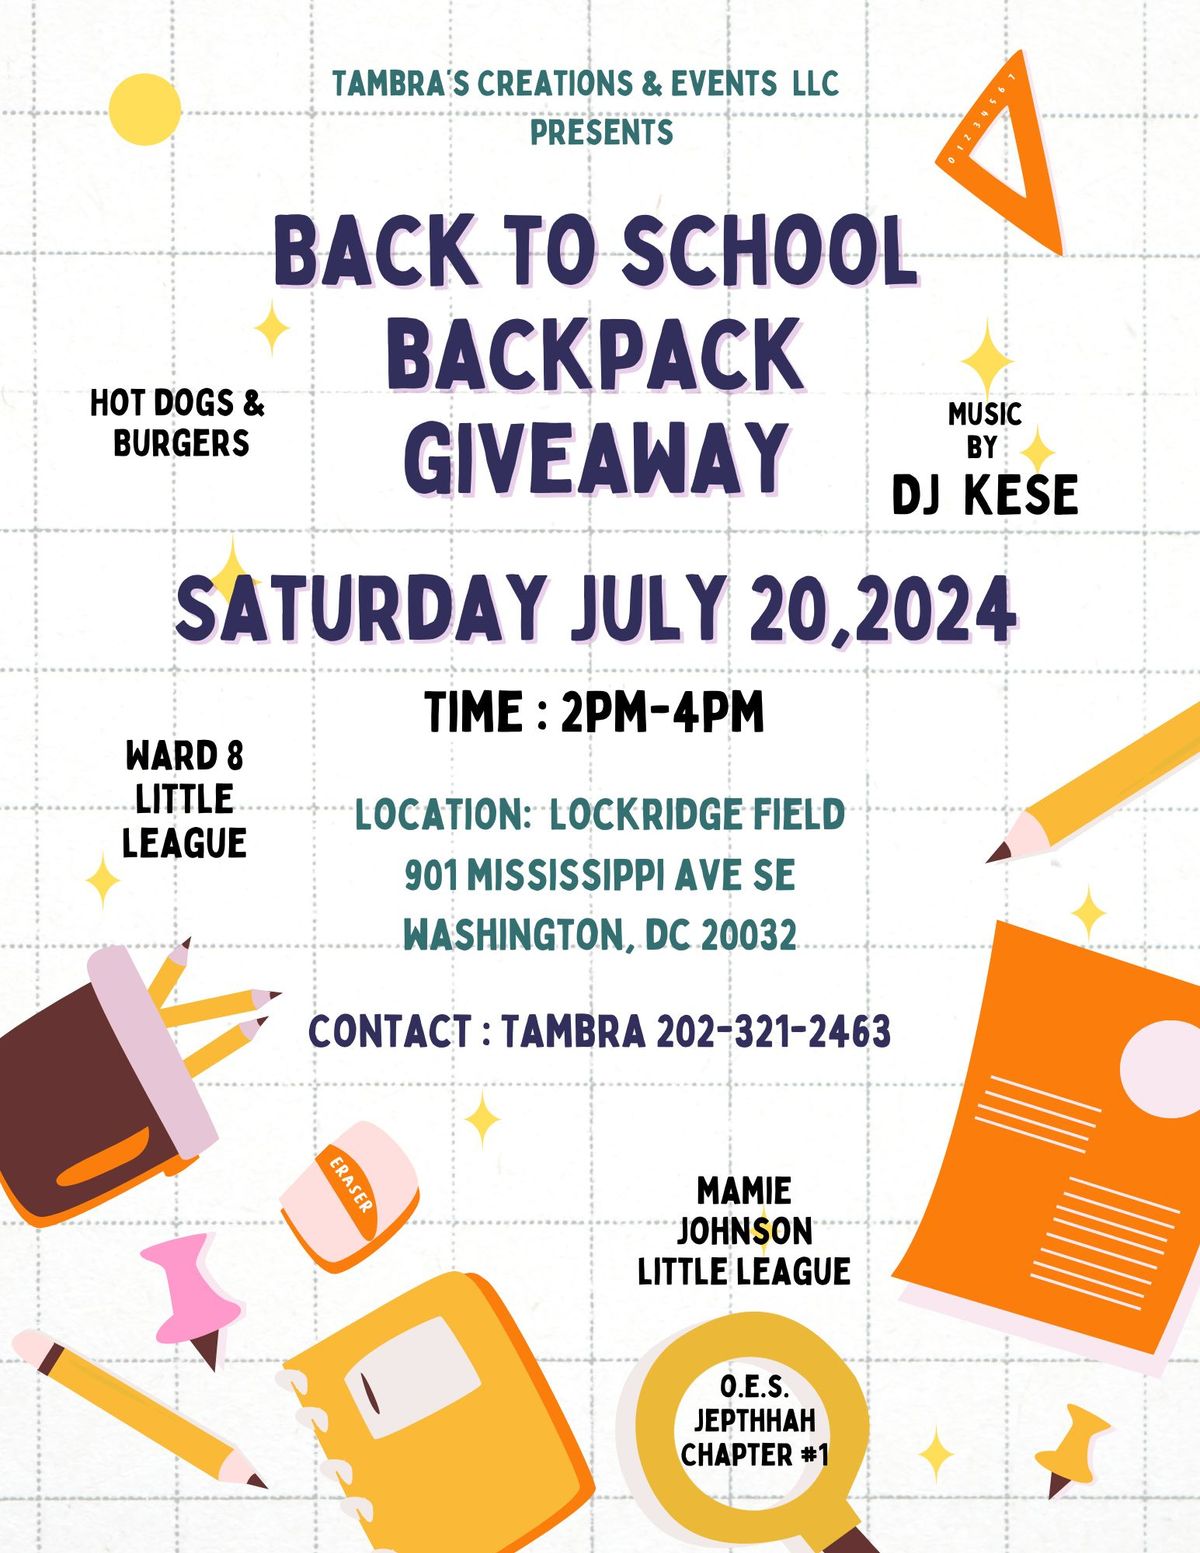 Annual Backpack Giveaway